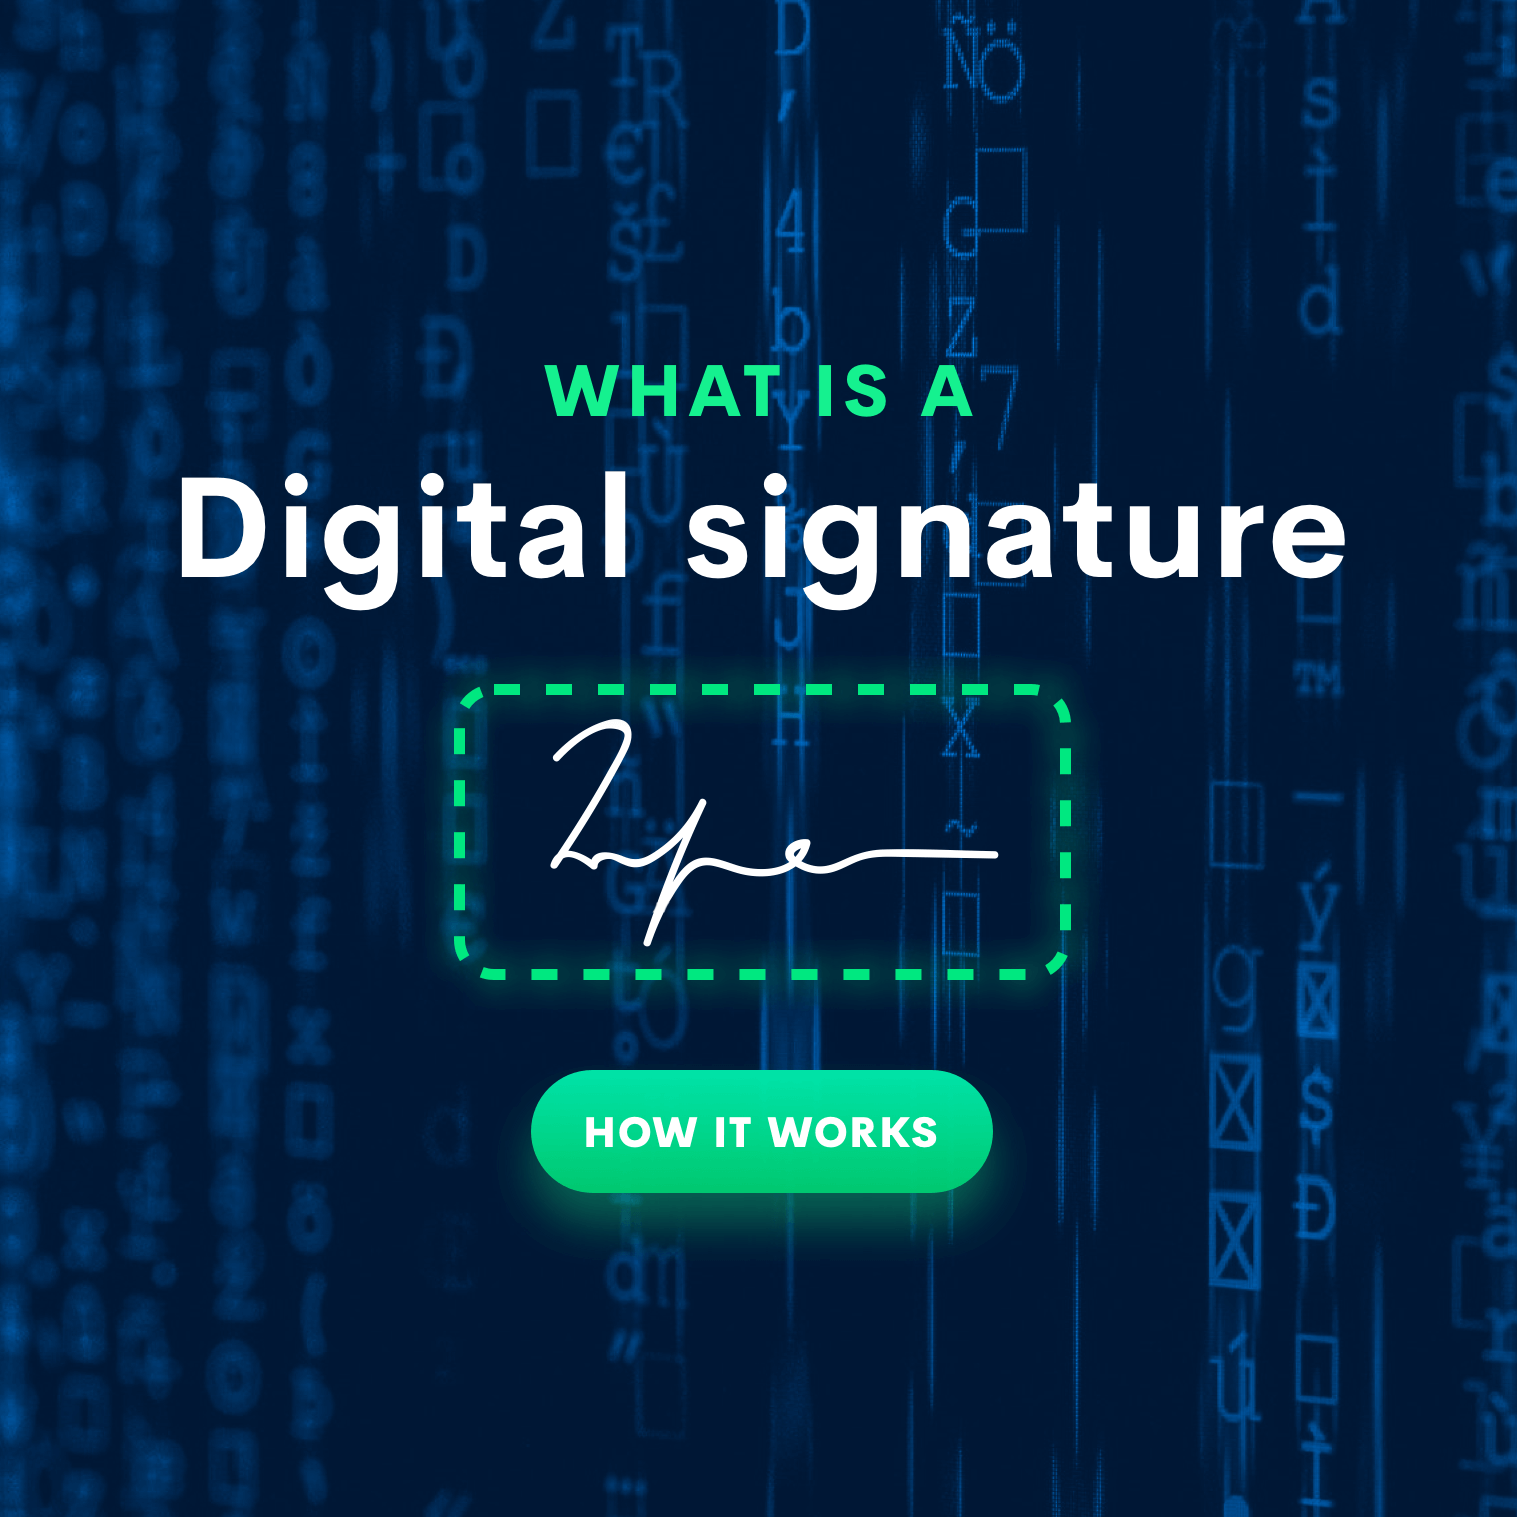 how does a digital signature work image 1